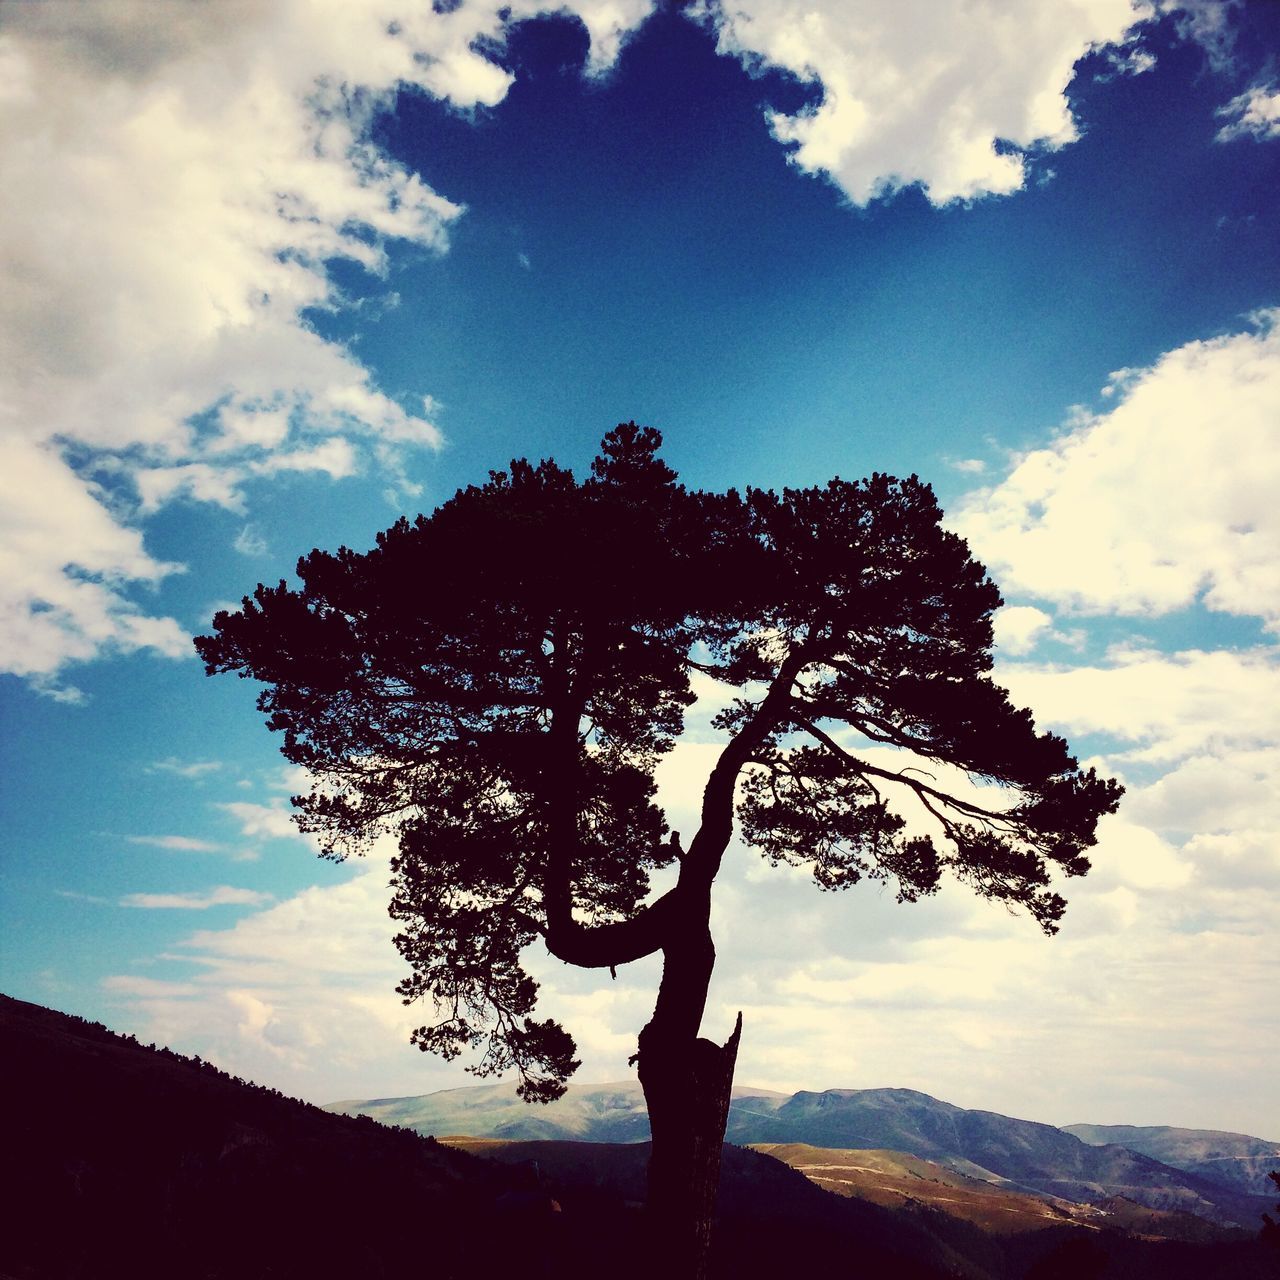 sky, tree, silhouette, tranquility, tranquil scene, cloud - sky, mountain, beauty in nature, nature, cloud, leisure activity, landscape, scenics, standing, lifestyles, full length, low angle view, sunlight